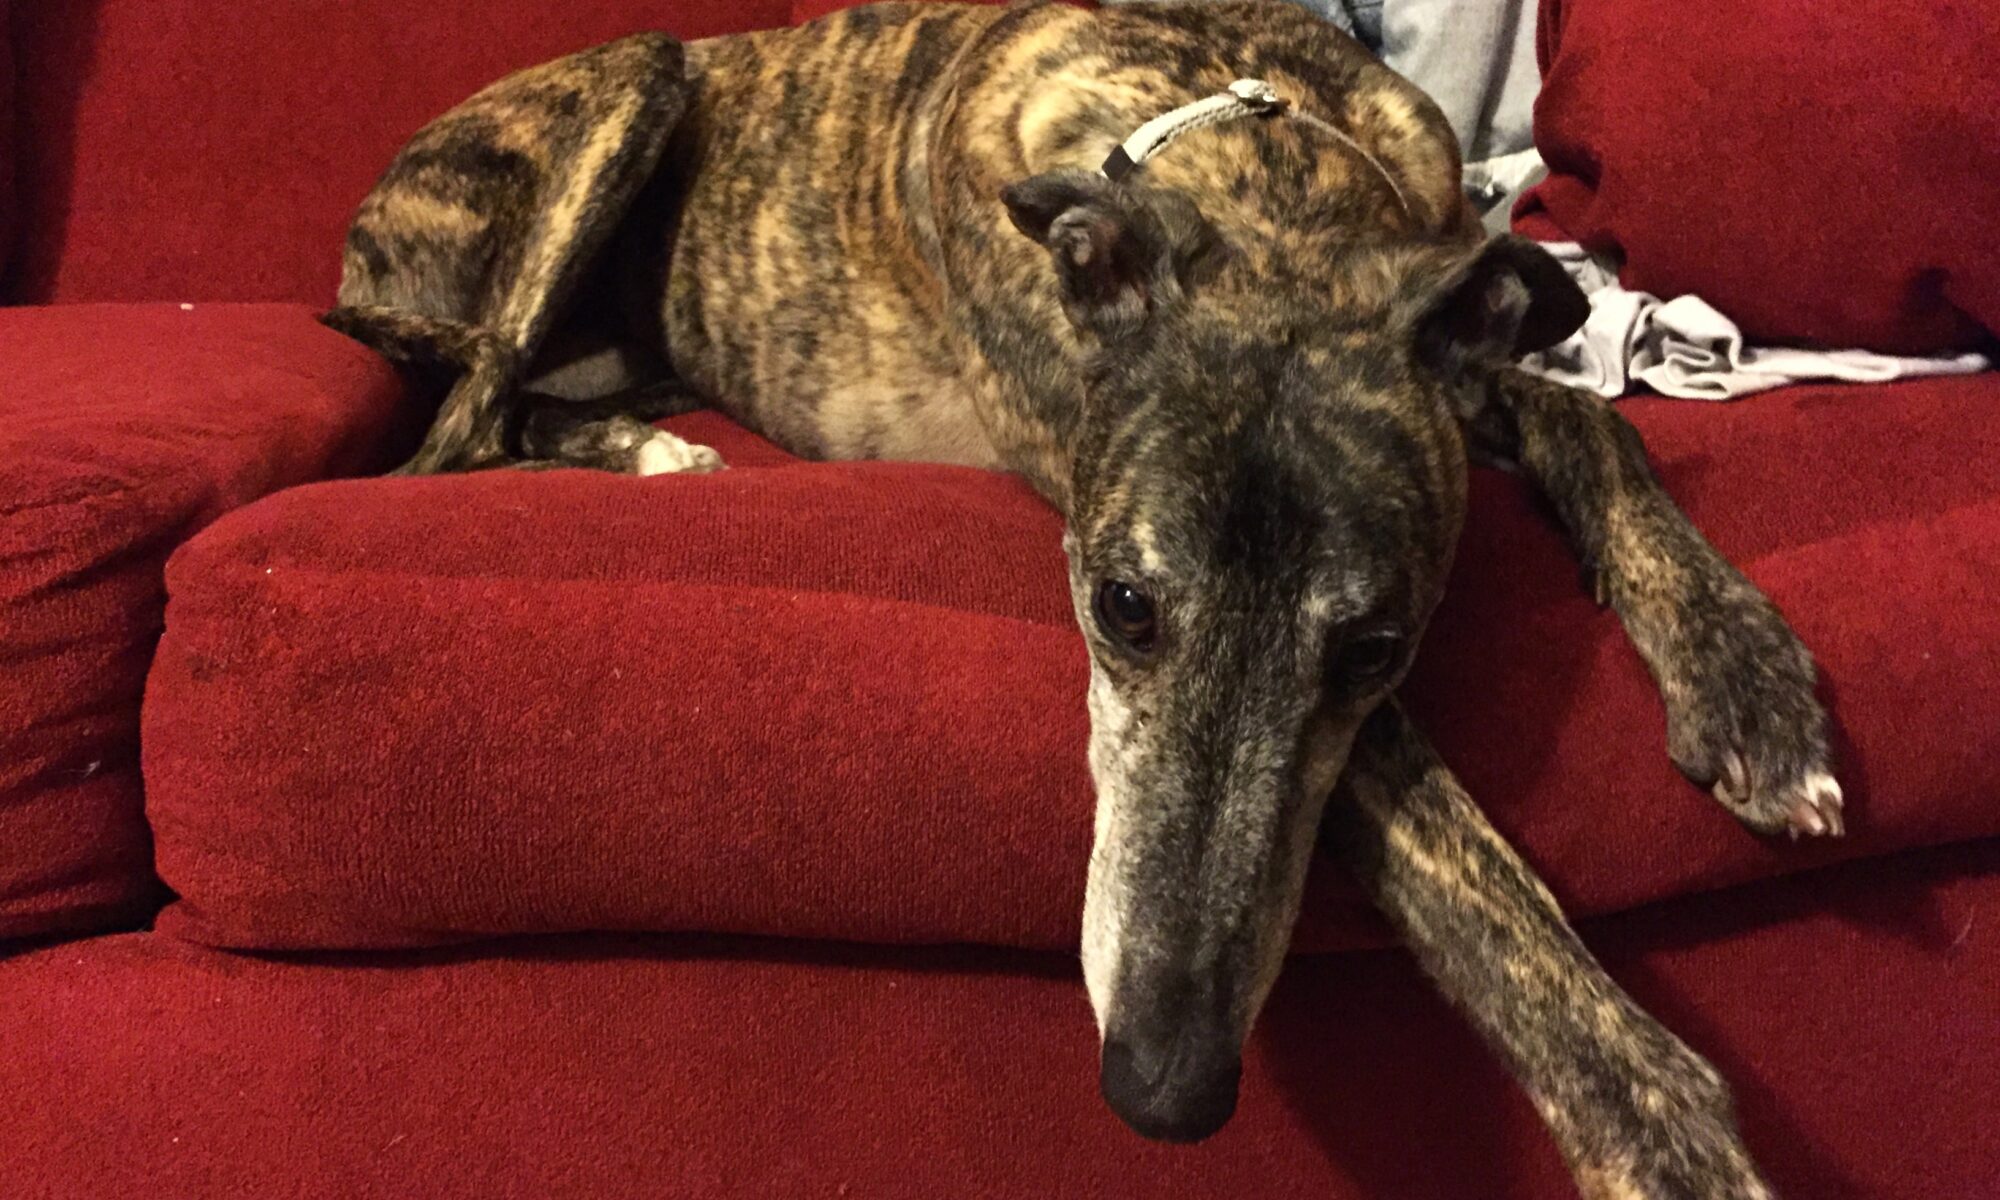 safe at home day training photo is a brindle greyhound lying on a red couch